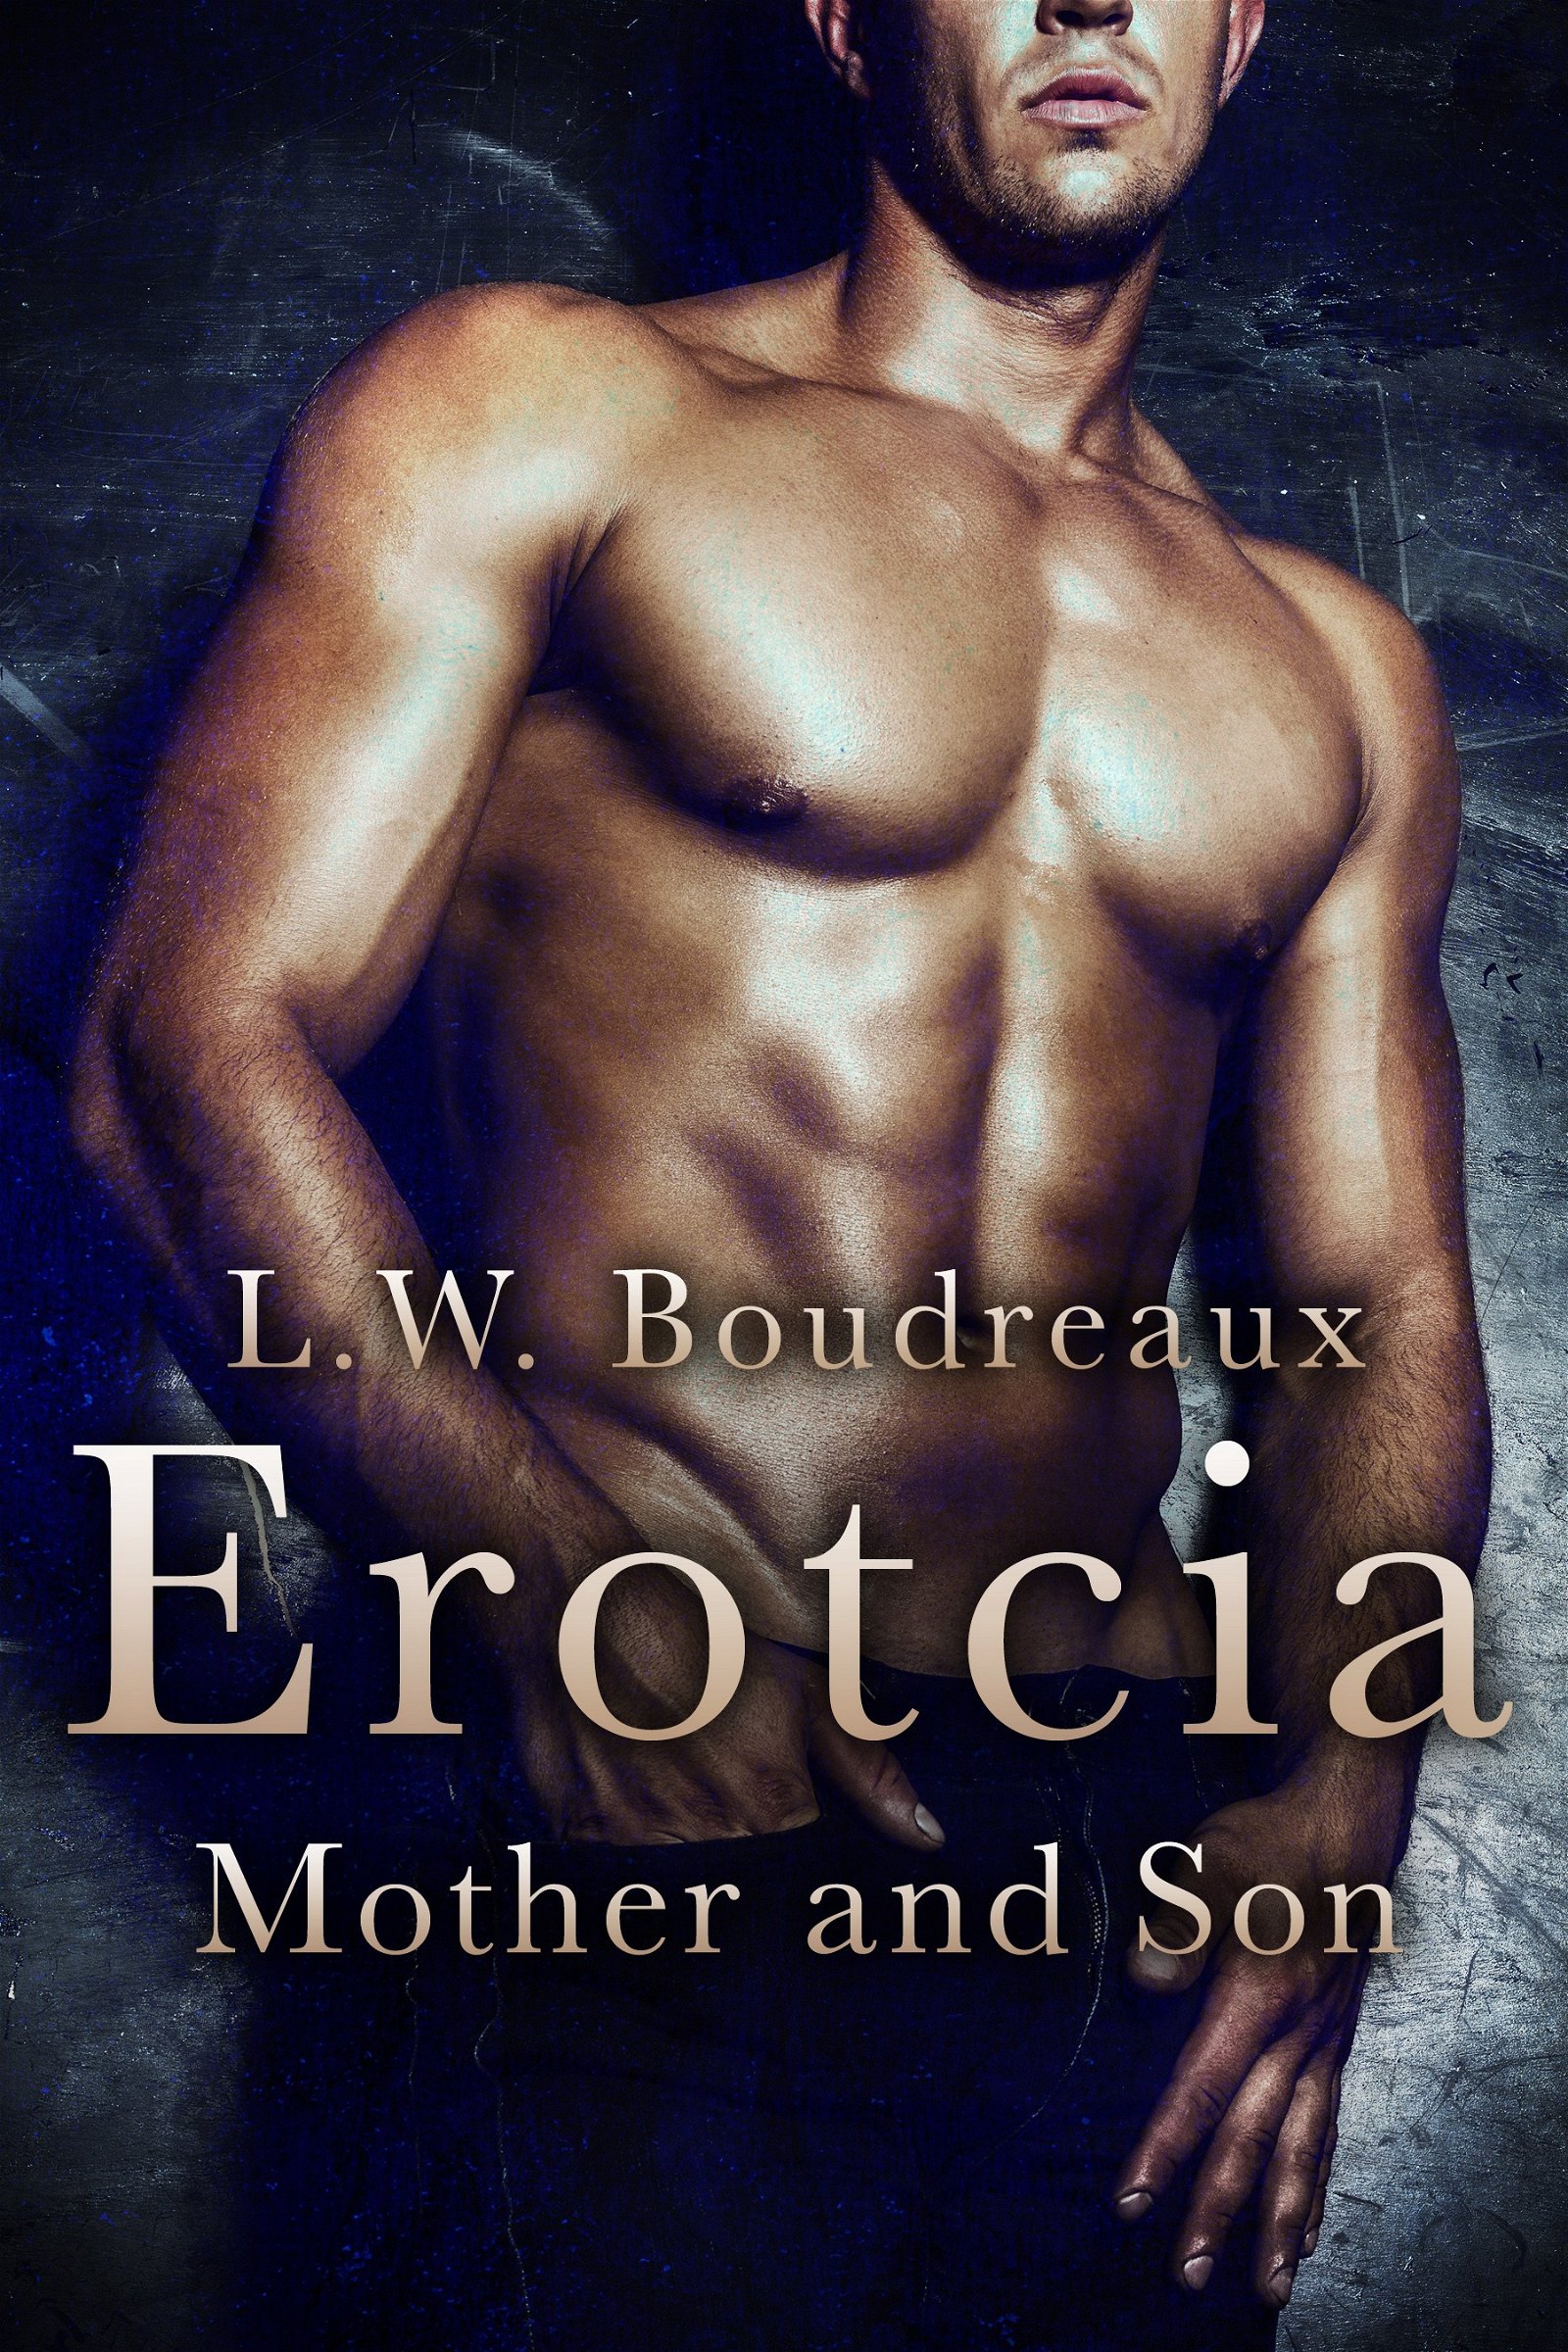 Watch the Photo by erotcia with the username @erotcia, who is a verified user, posted on May 3, 2020. The post is about the topic Erotcia: Erotica books by LW Boudreaux. and the text says 'SHARE IF YOU LOVE MILFS!!!

Erotica Mother and Son. Free taboo download at https://www.erotcia.com/taboo/

Check out the Erotcia blog for this and other free books, including Stepdaddy, Spanking Part I, and Alien Romance.

That's FOUR FREE BOOKS and over..'